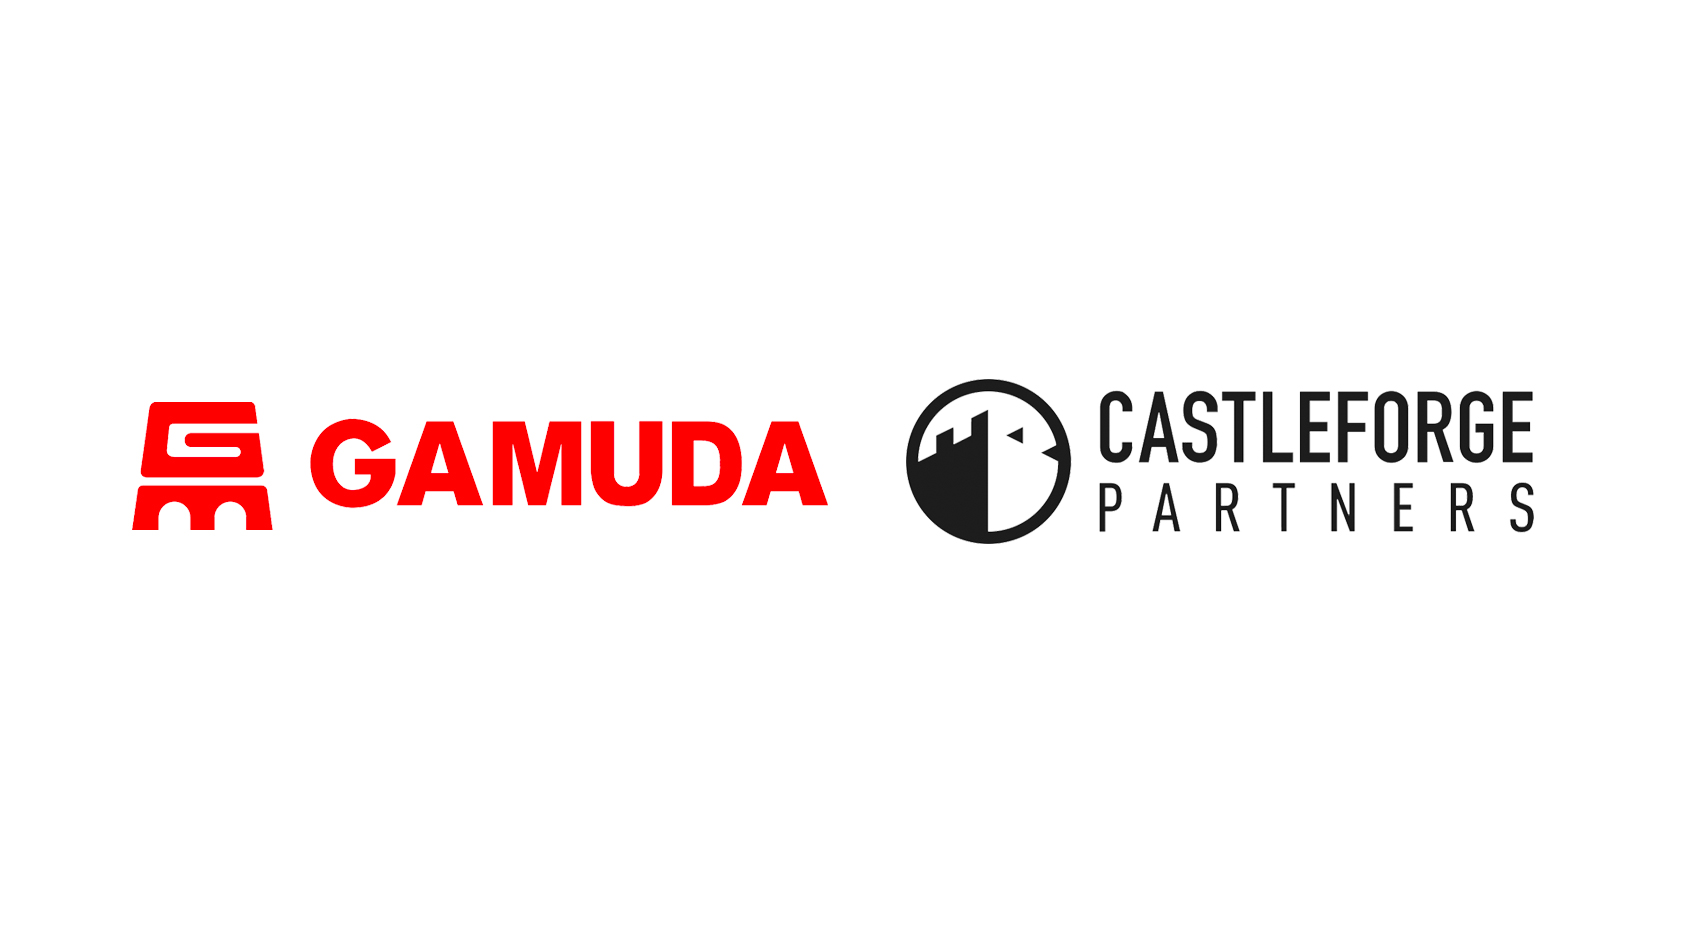 Gamuda and Castleforge Partners acquire Winchester House